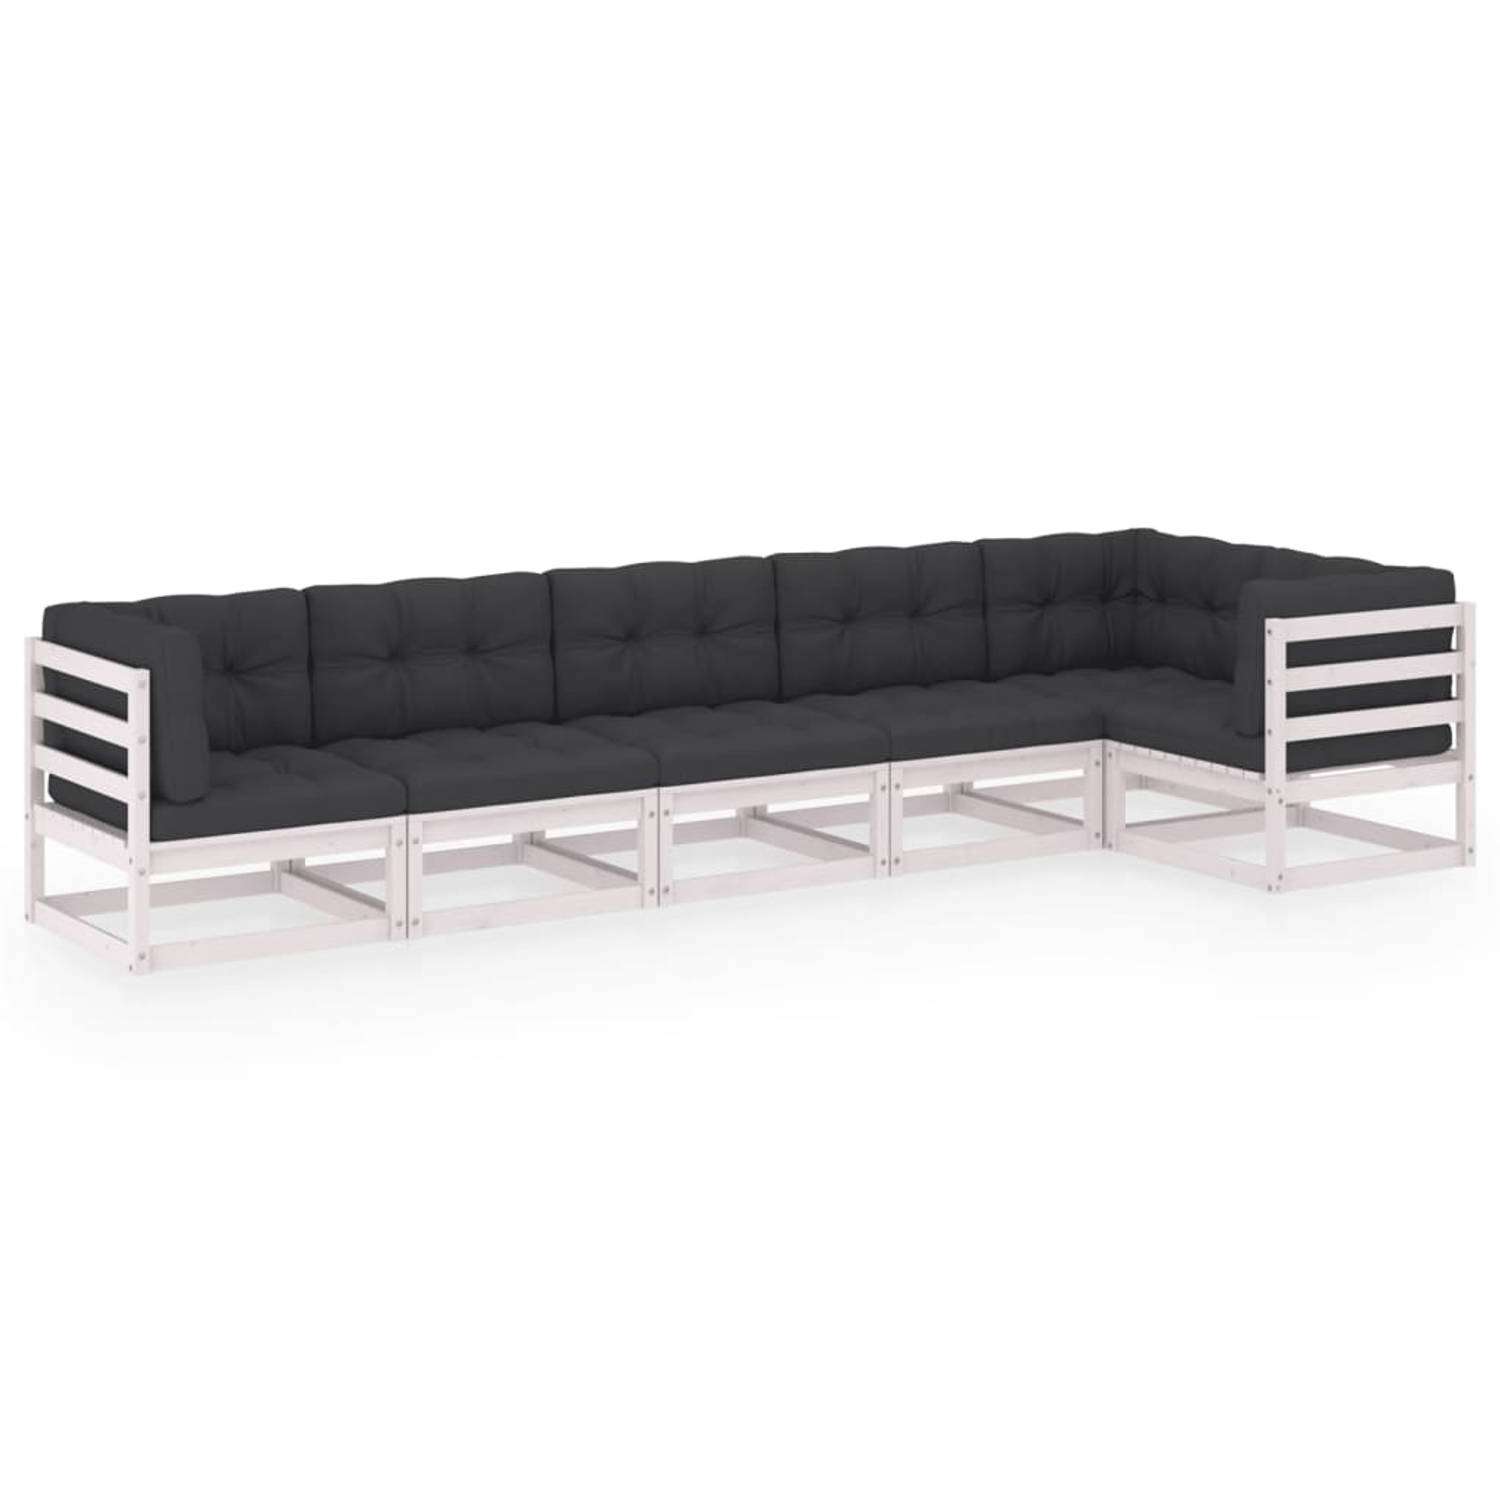 The Living Store Loungeset Massief Grenenhout - Wit - 70x70x67 cm - Antraciet kussen